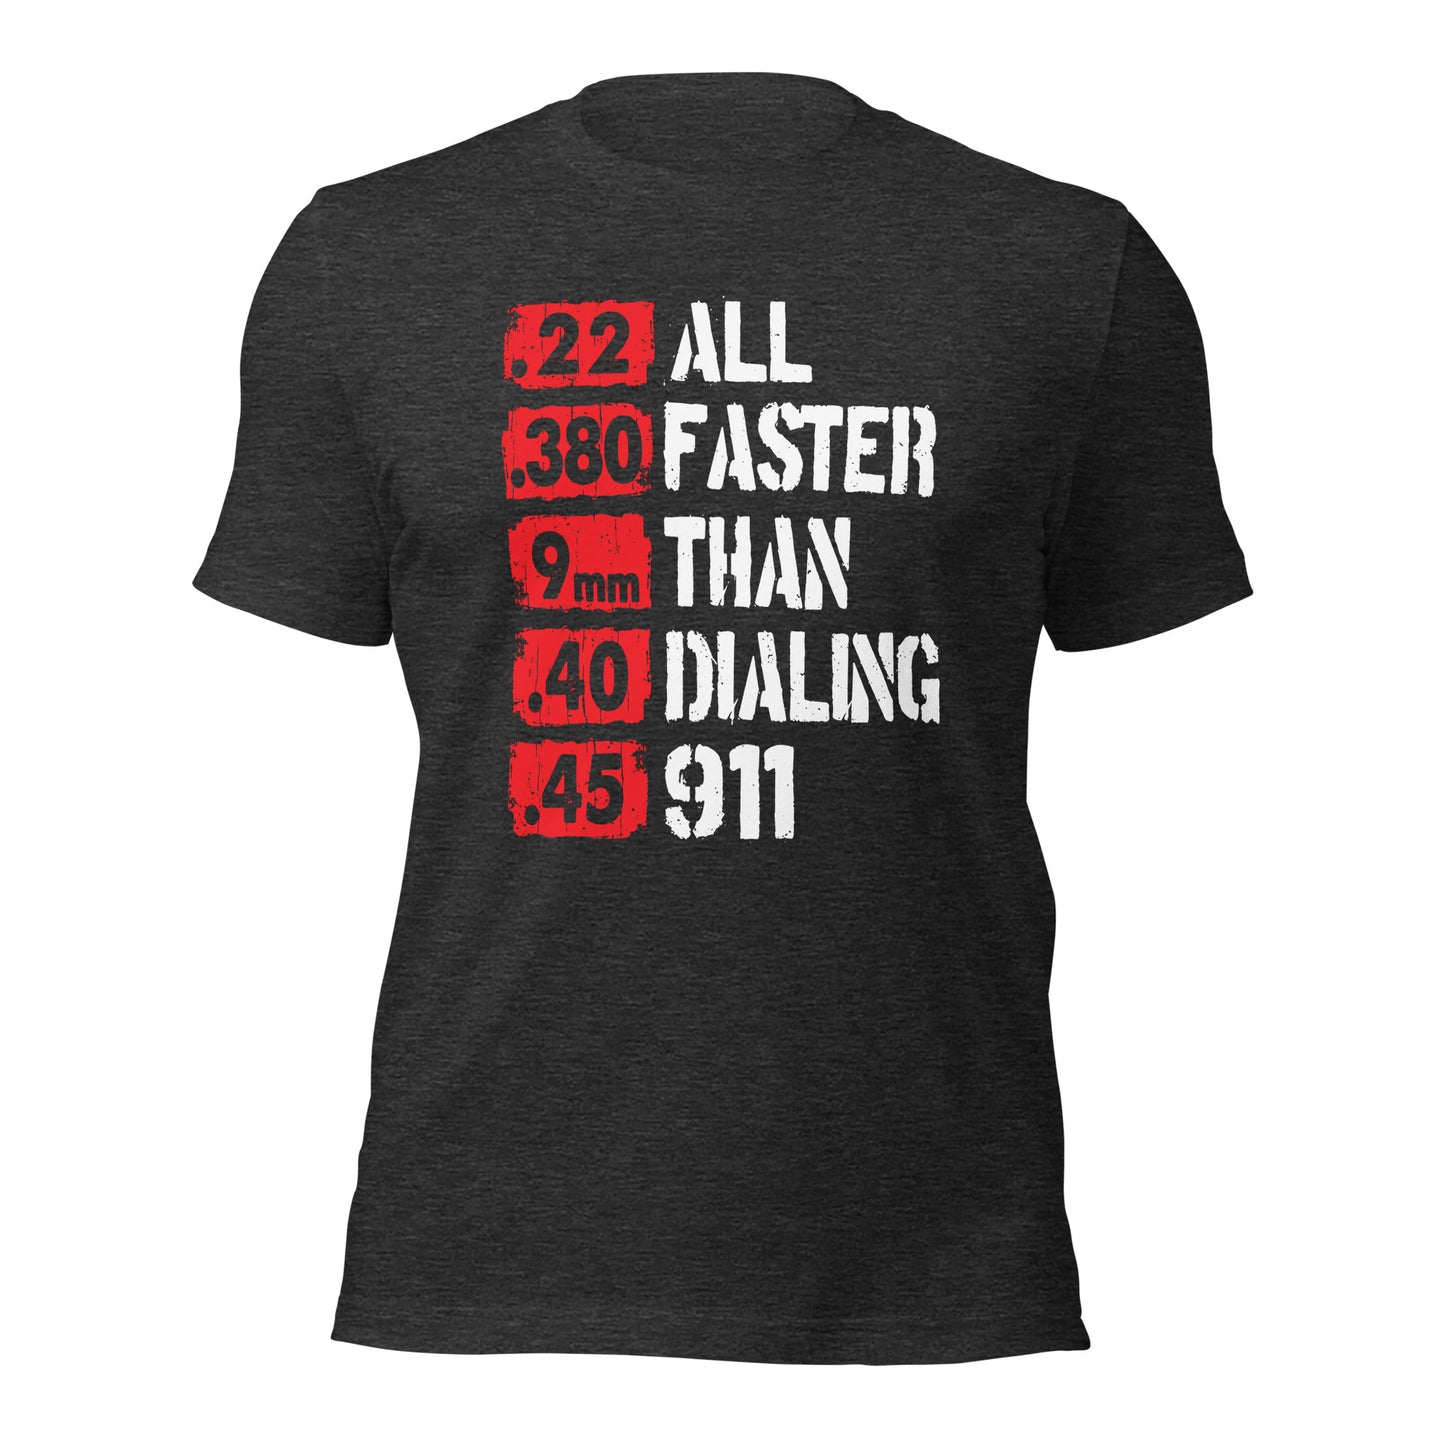 All Faster Than 911 (Front Design) Unisex t-shirt